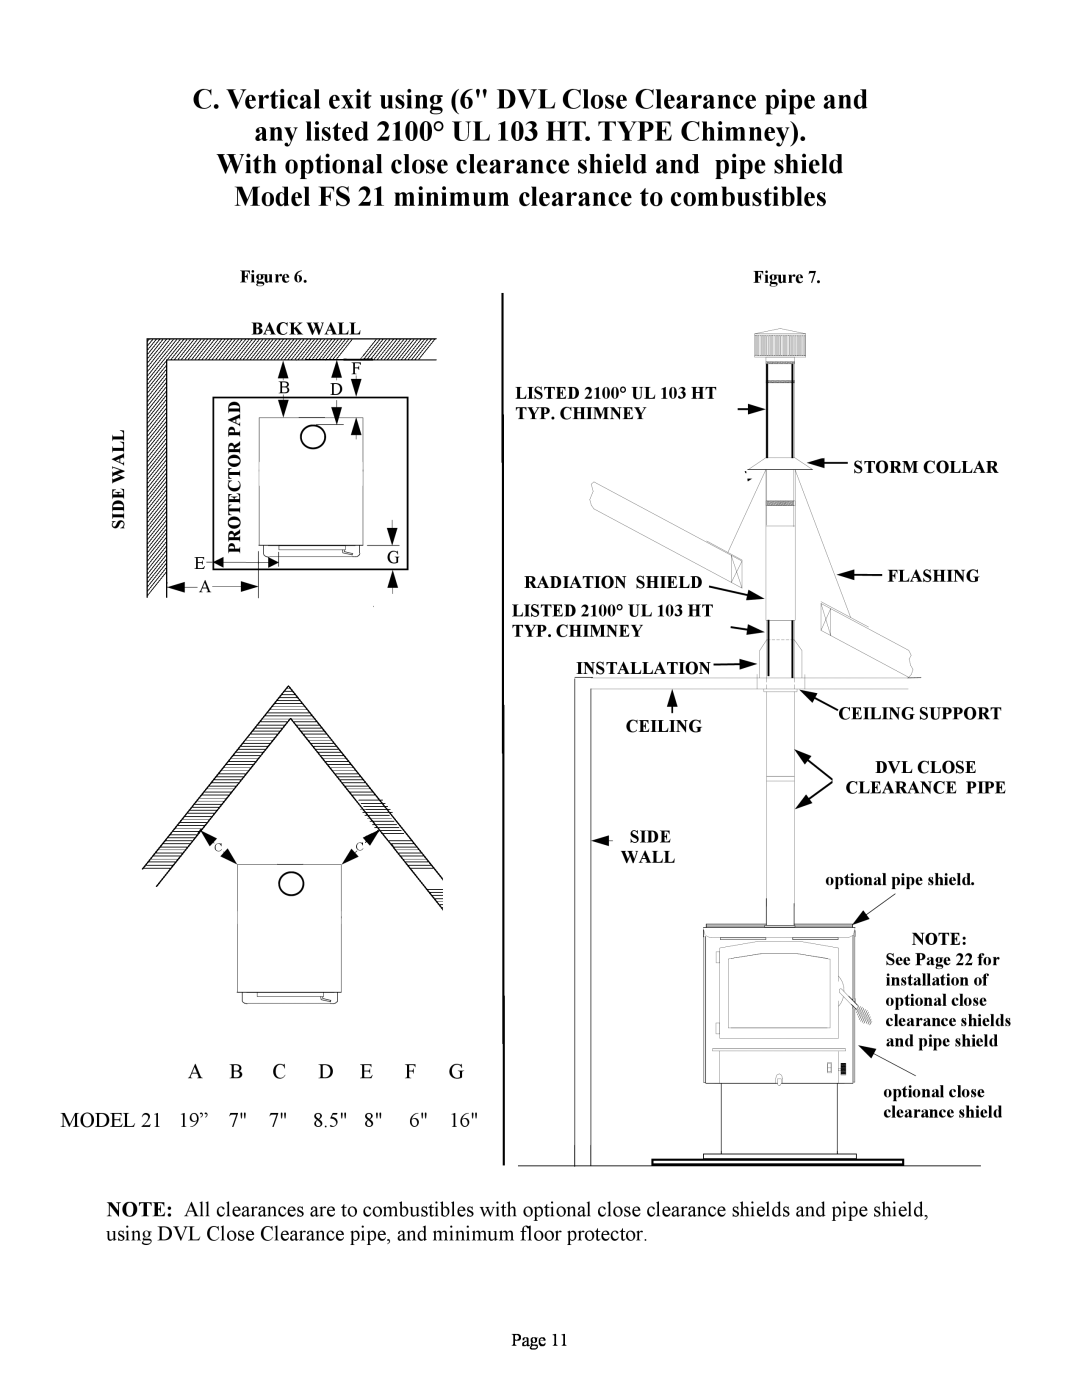 New Buck Corporation FS 21 installation instructions any listed 2100 UL 103 HT. TYPE Chimney 